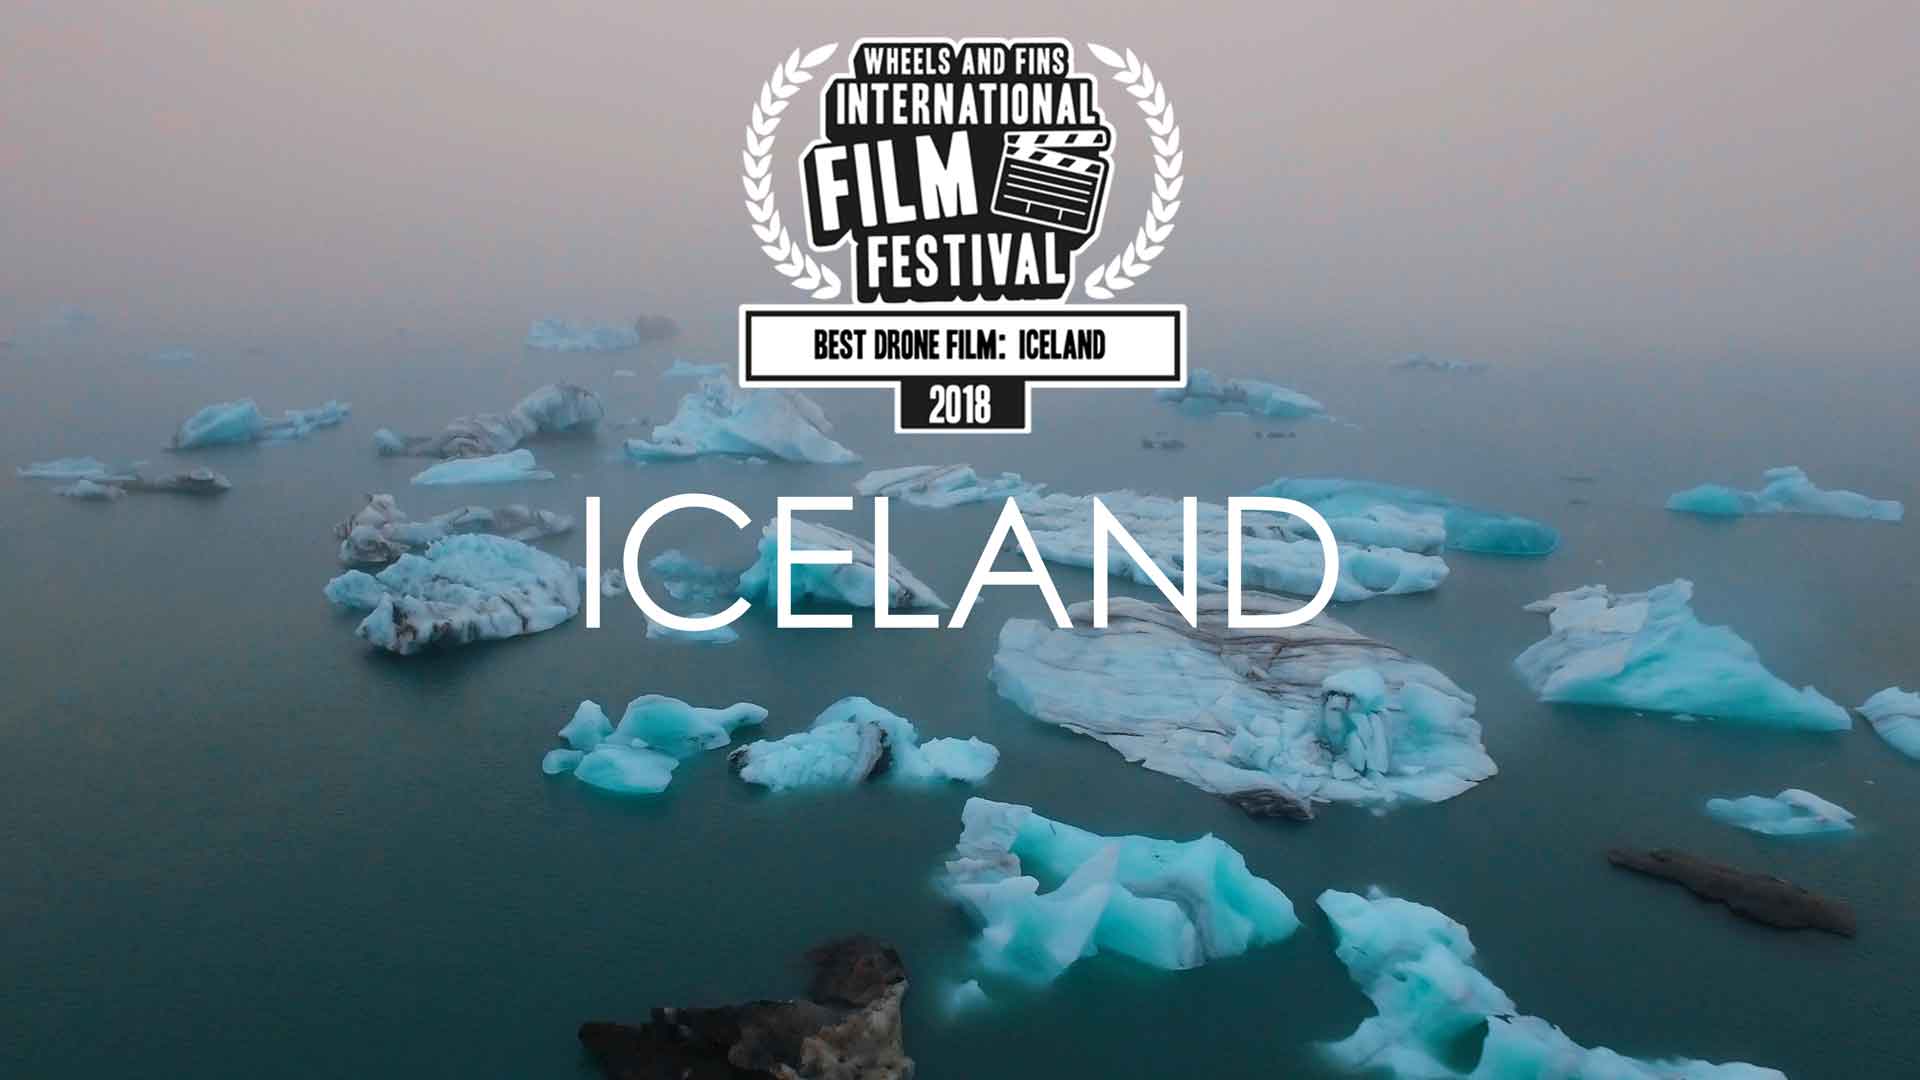 iceland-drone-images-western-australia-perth-winning-photography-cineatography-vdeio-film